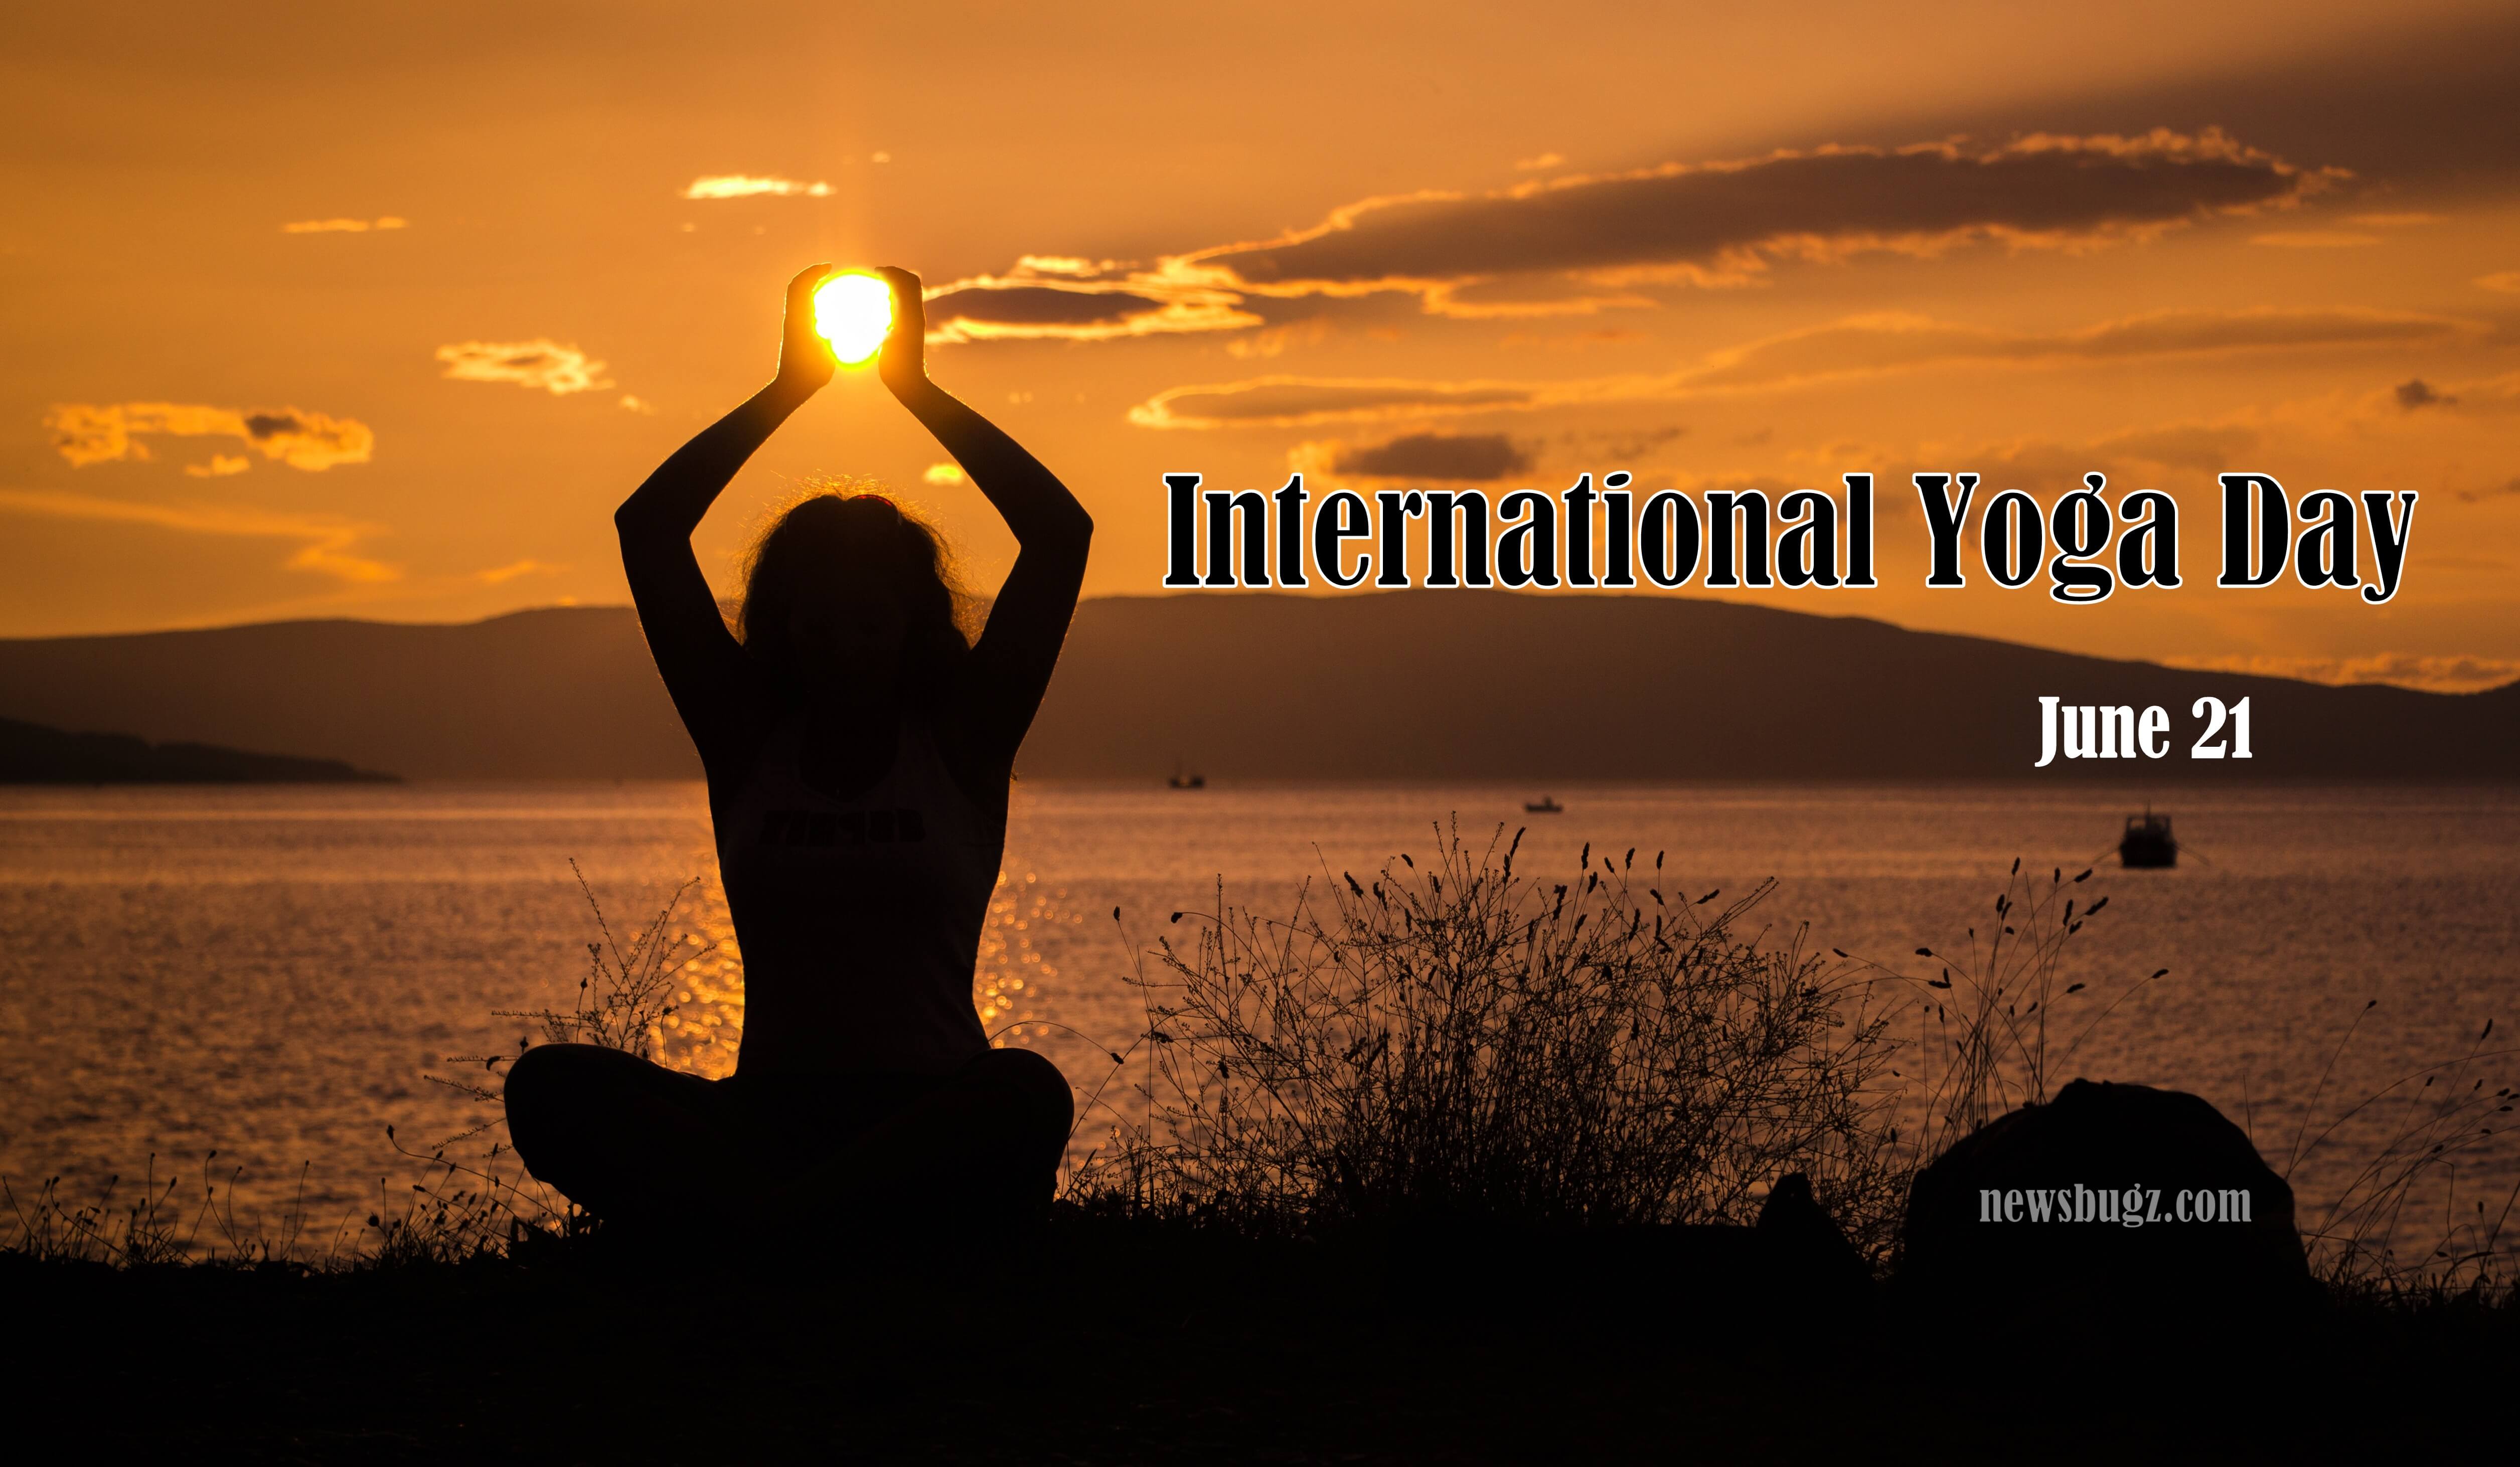 International Yoga Day june 21 picture